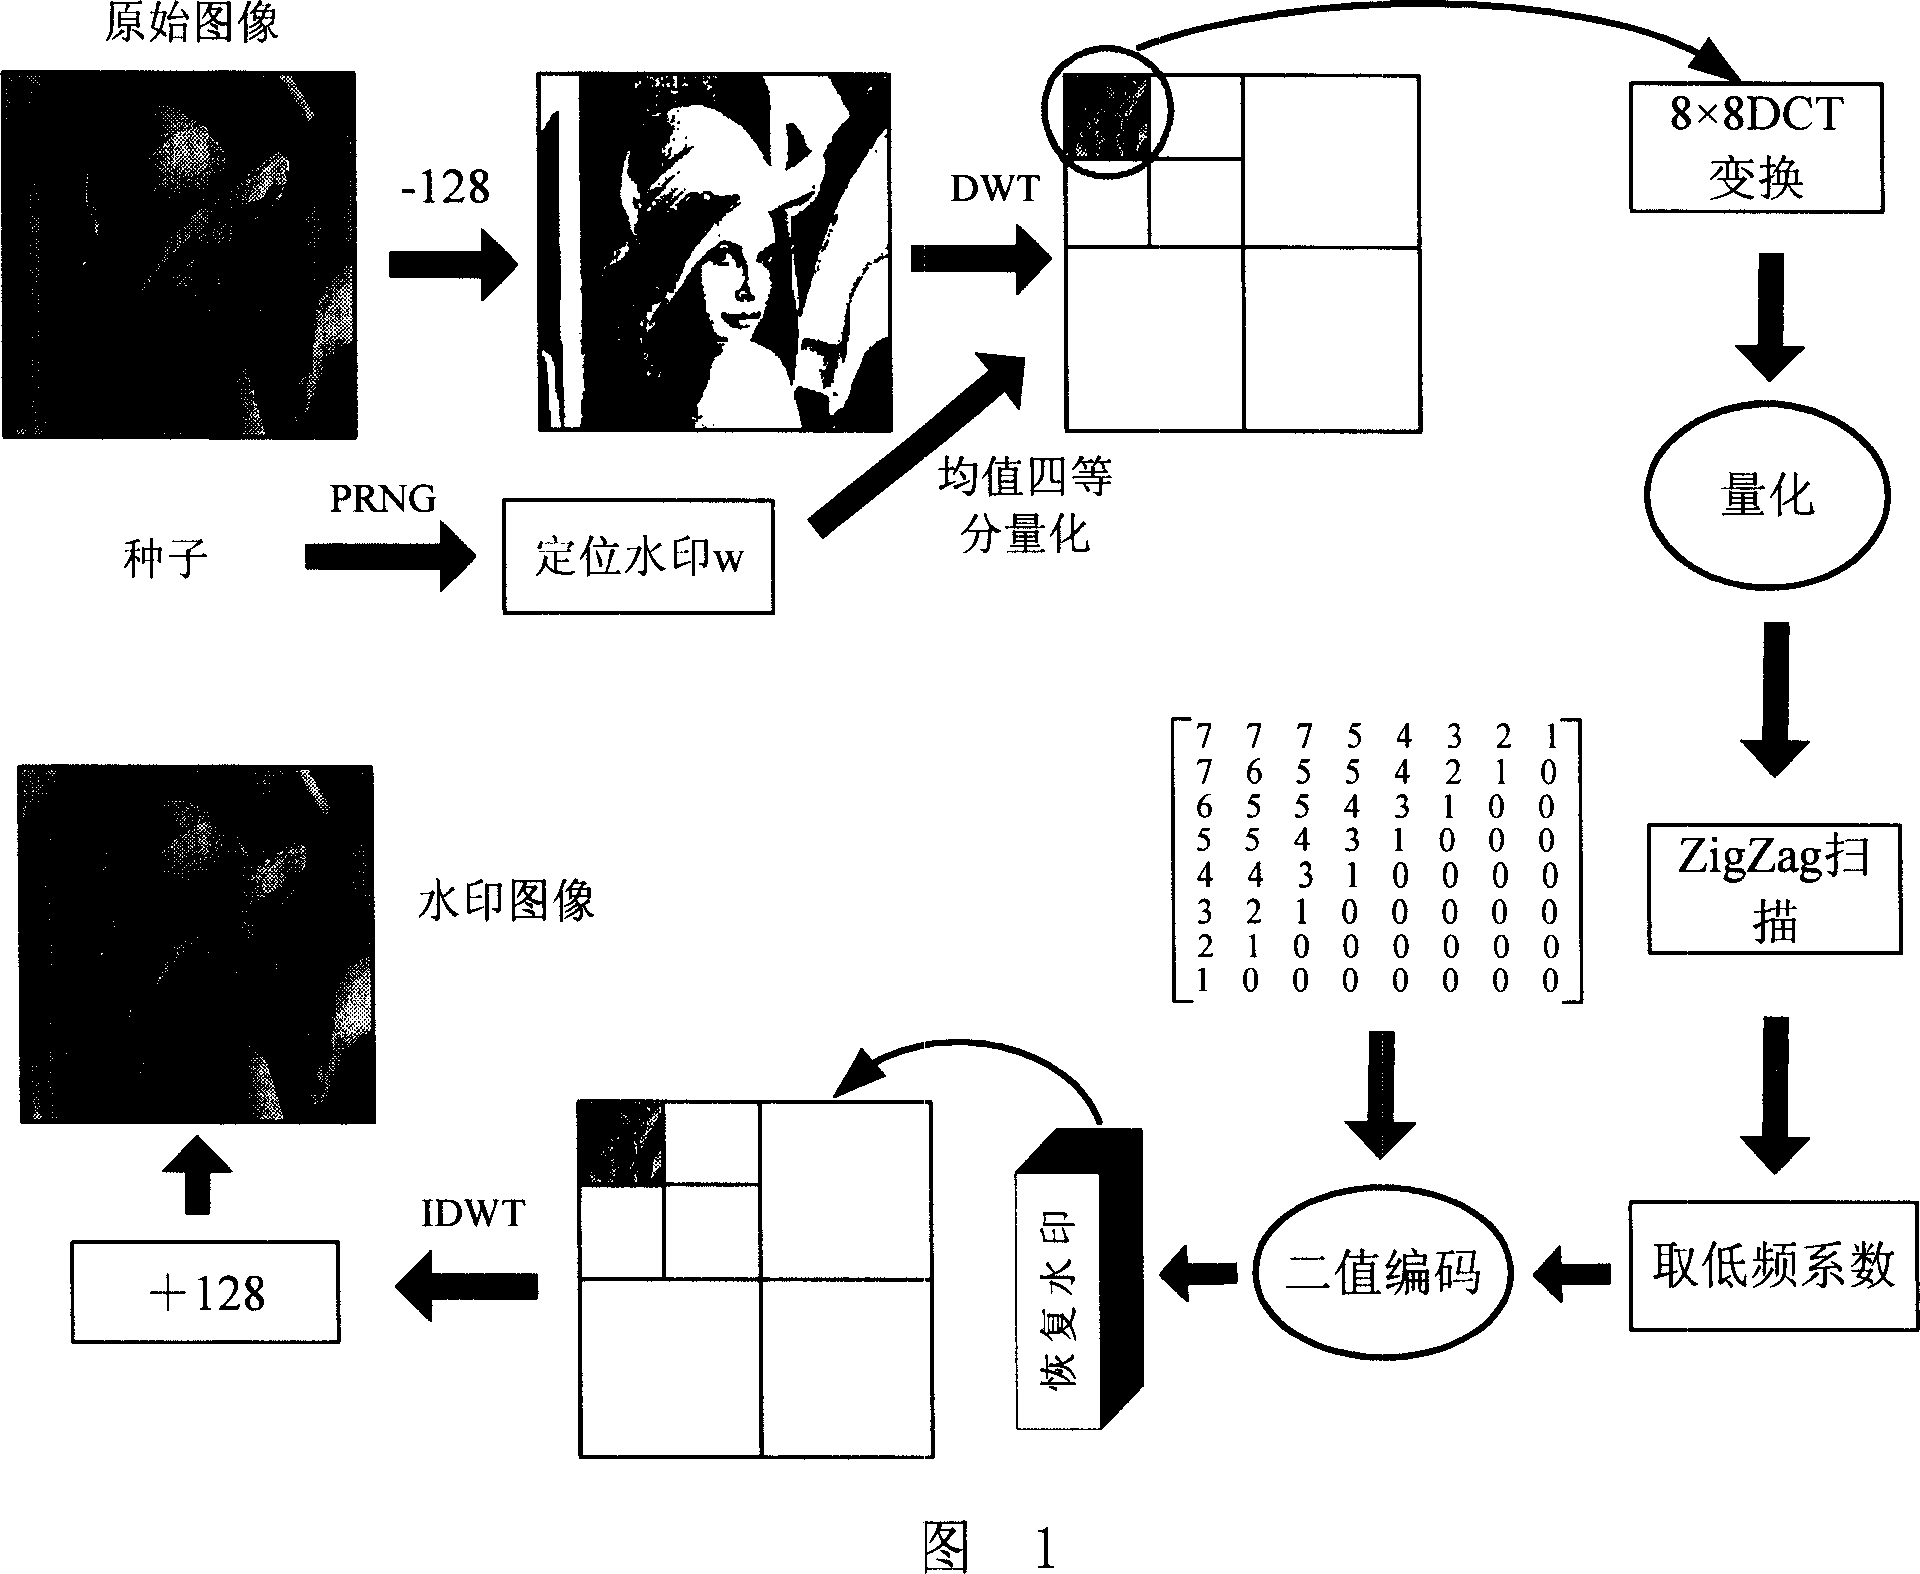 Active mode digital image content identification method based on wavelet and DCT dual domain